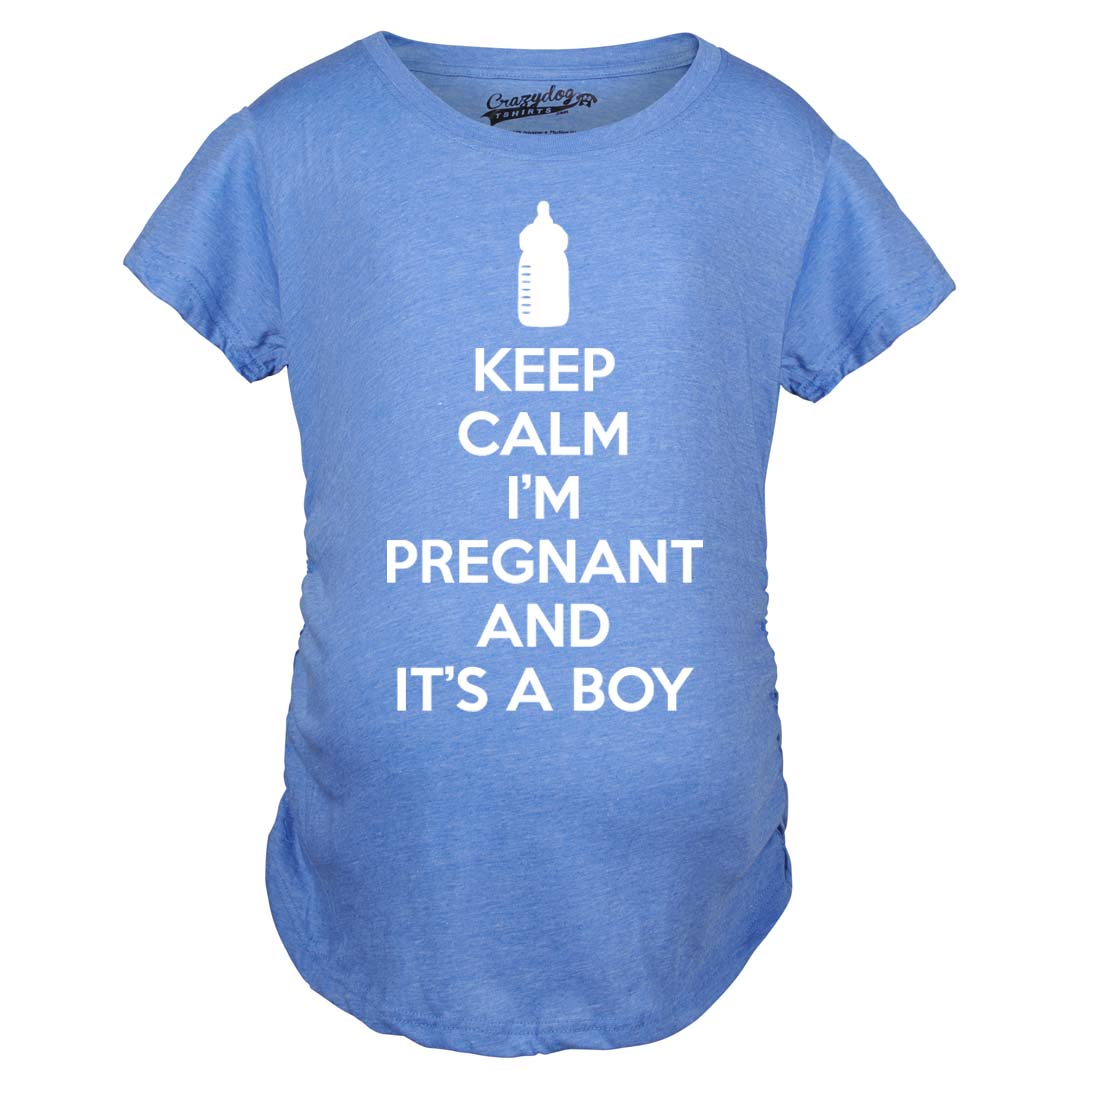 Funny Keep Calm I'm Pregnant And It's A Boy Maternity T Shirt Nerdy nerdy Tee